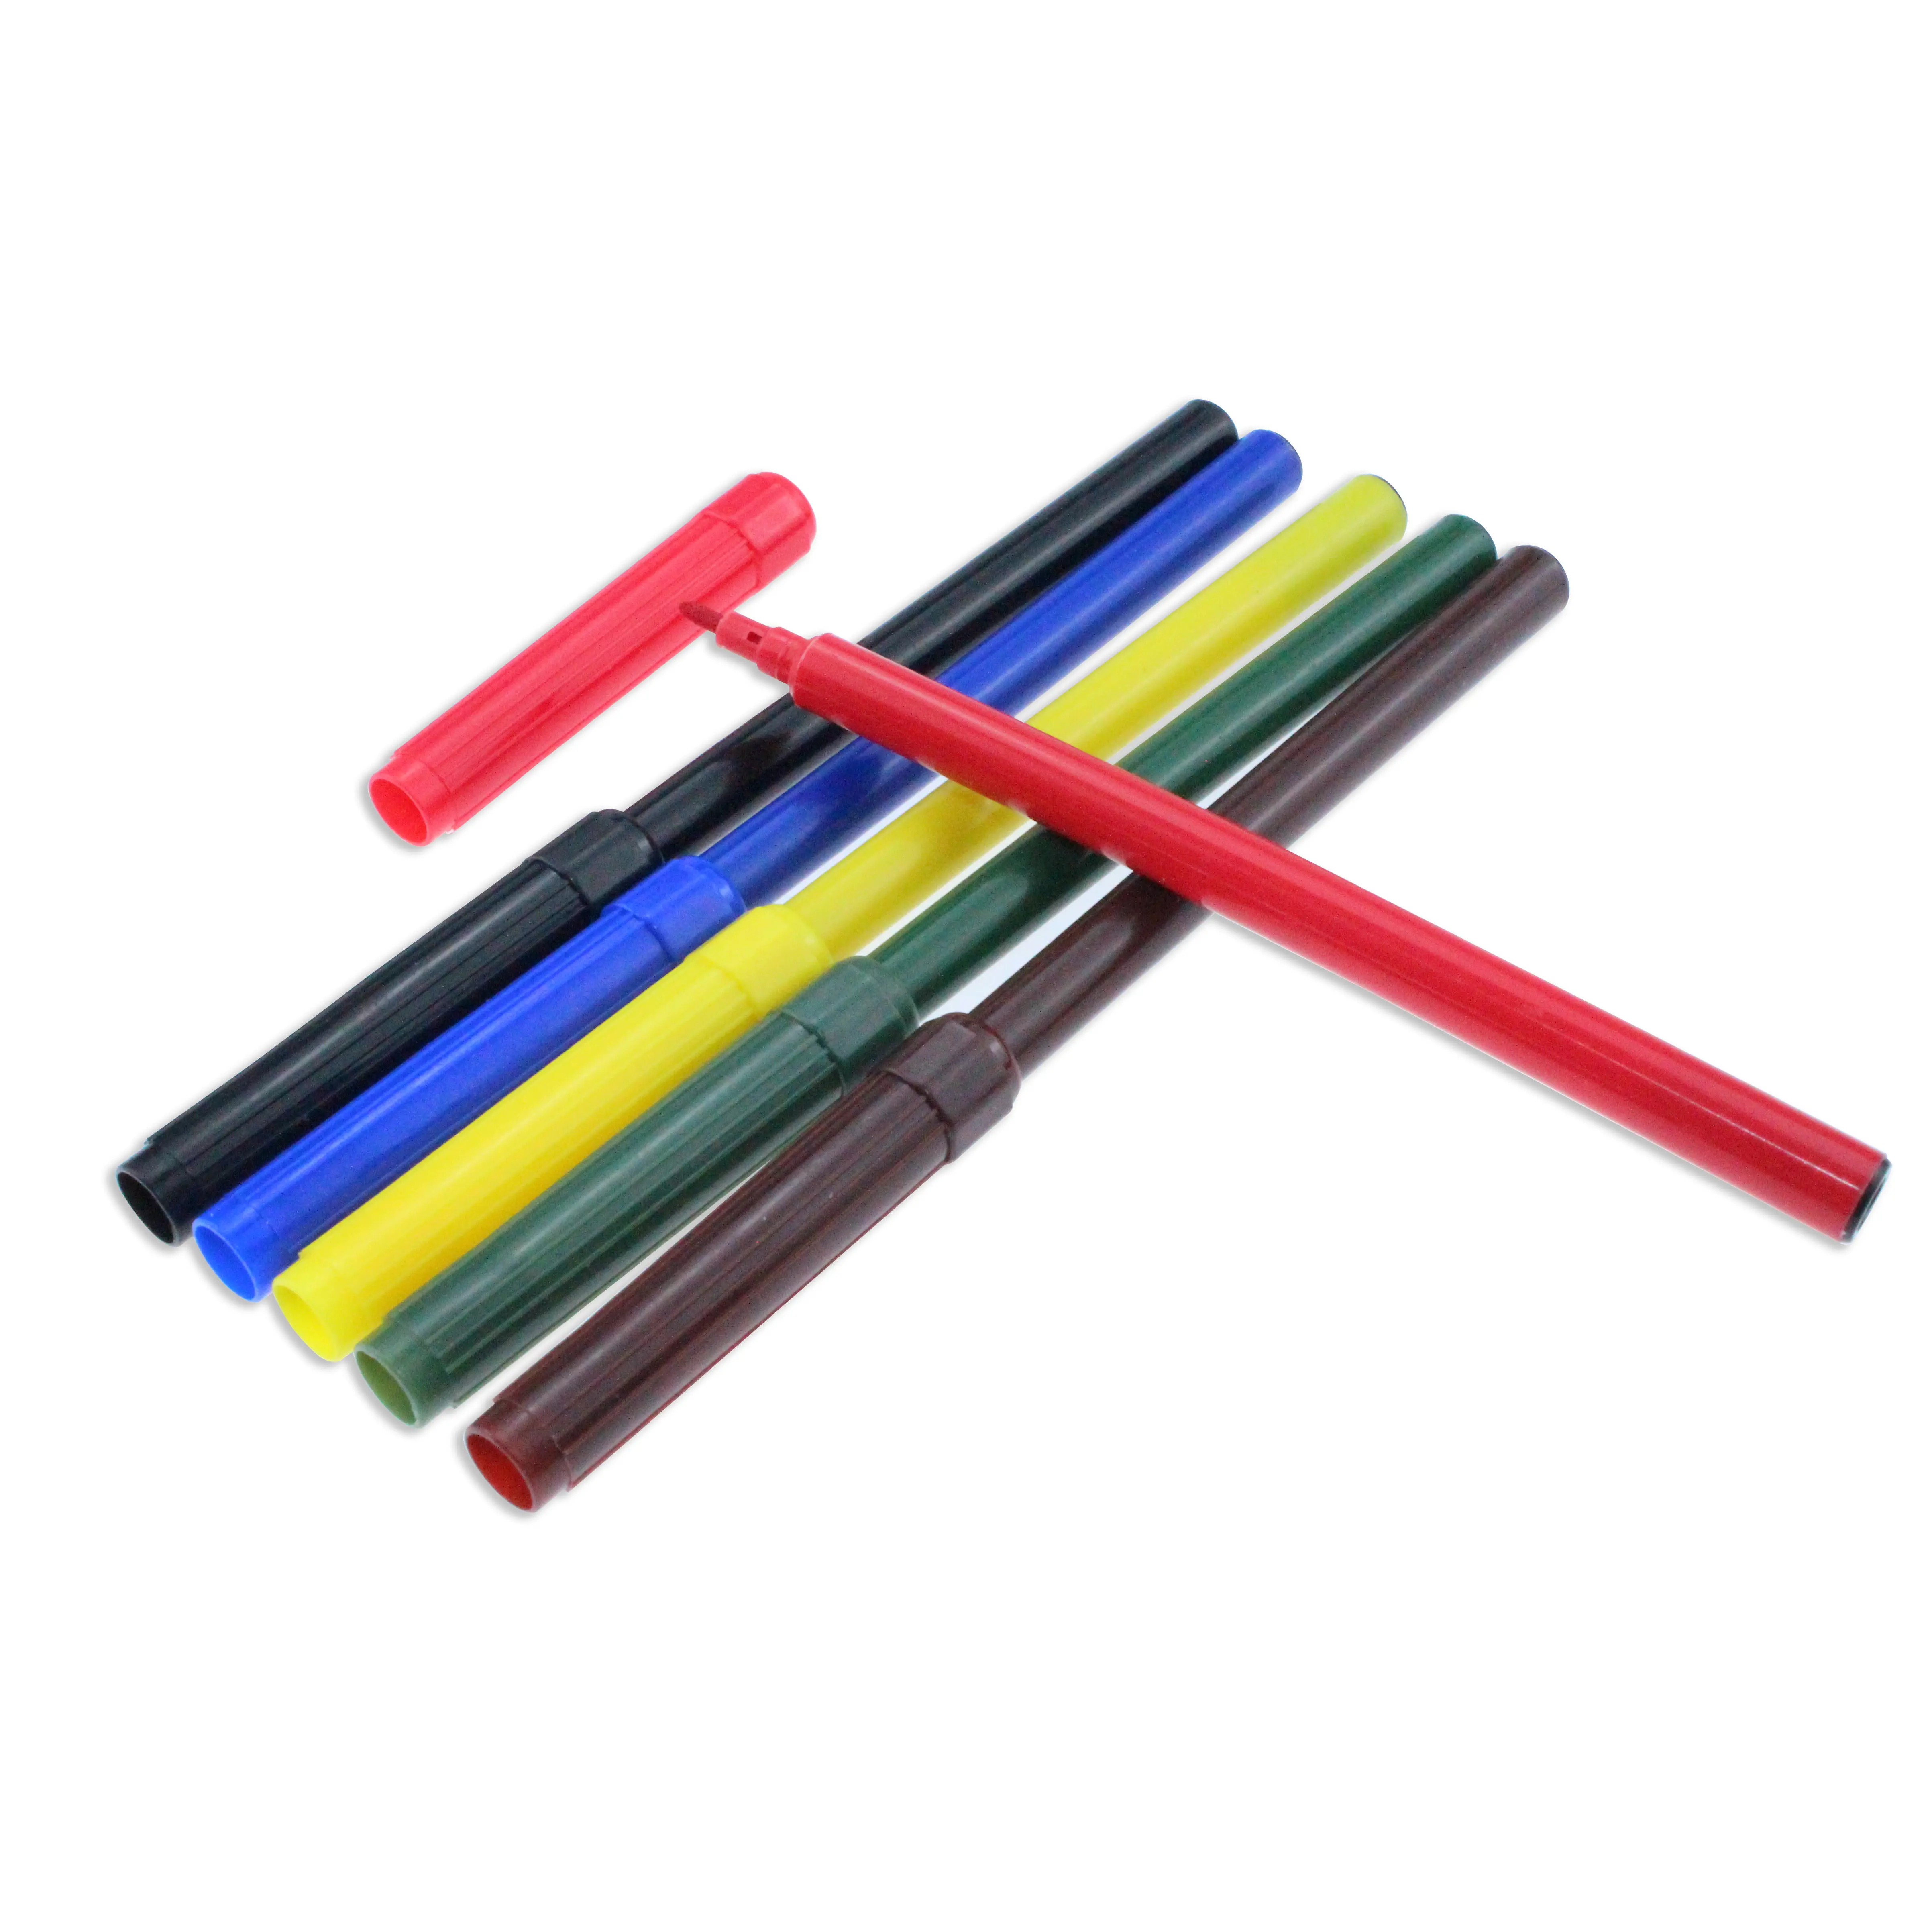 Factory Directly Sale OEM Design Writing Smooth Felt Tip Paint Marker 6pcs Packaged In Pvc Wallet